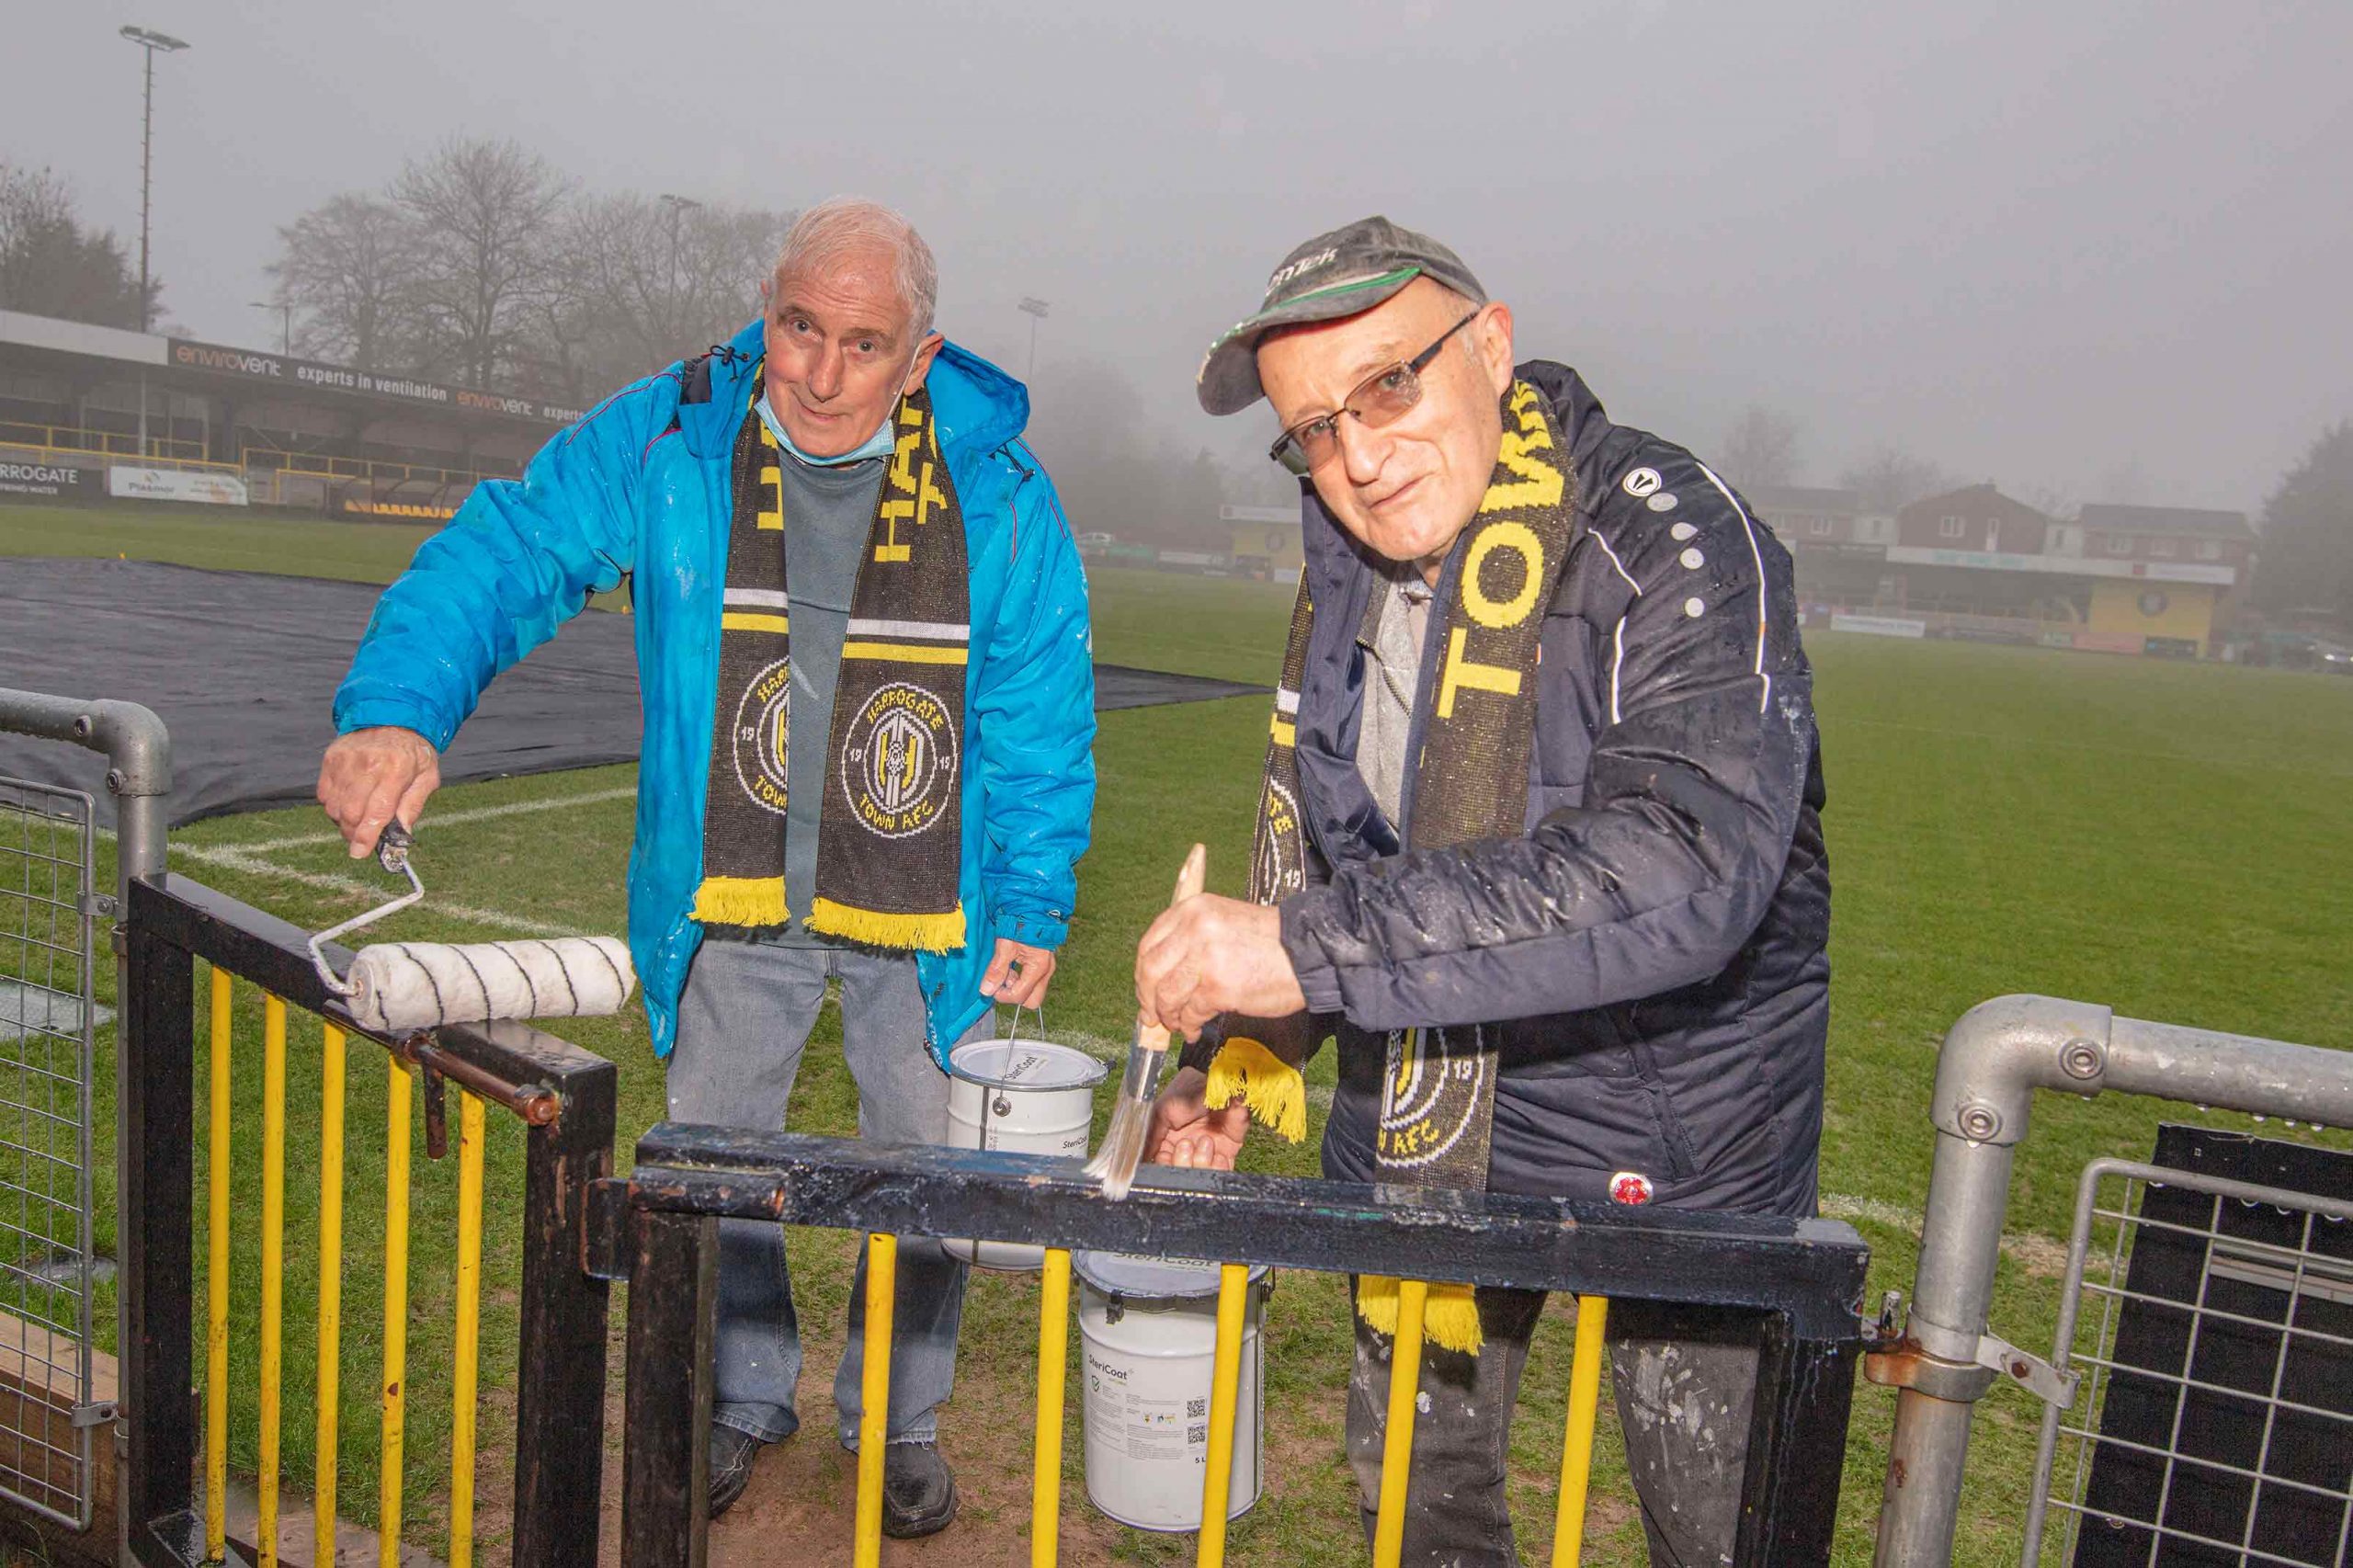 Jim Hague, played for Harrogate Town at 14 years Old.  He played centre forward and has the record for most number of appearances and most number of goals at the Club.  He has Dementia.  Jim has scored more goals than anyone else in the history of the club.  (R) Geoff Butler, He has volunteered at the Club for 60 years. He started volunteering at 14 years old